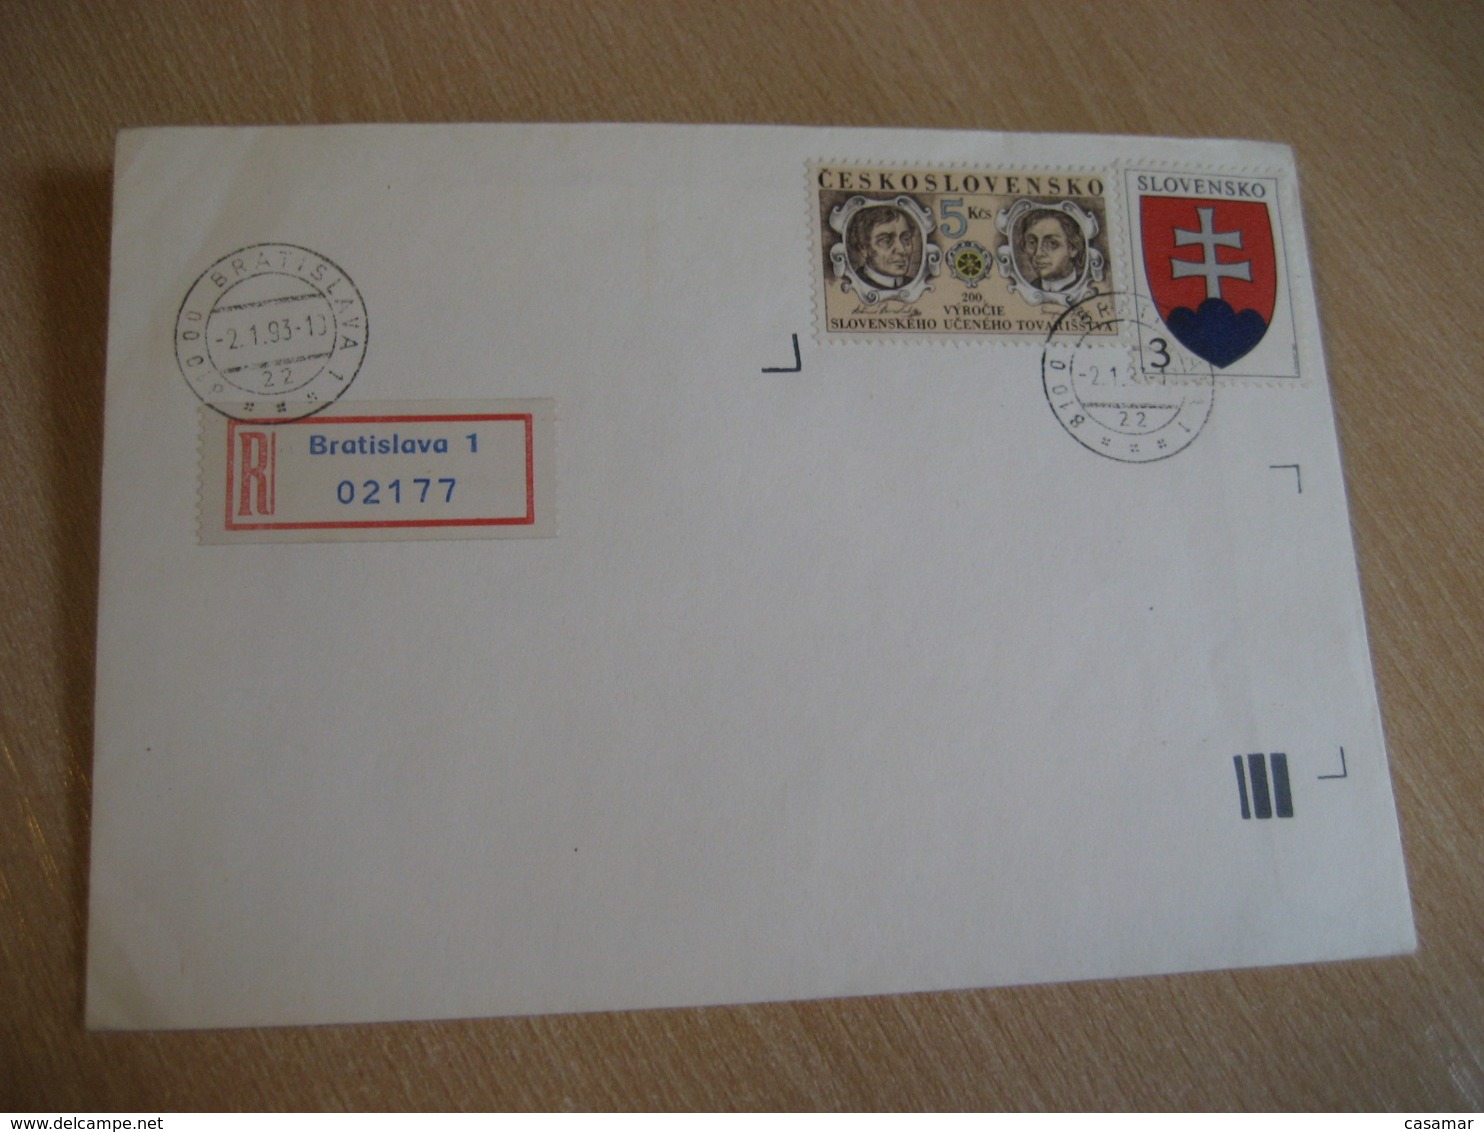 BRATISLAVA 1993 2 Stamp On Cancel Registered Cover SLOVAKIA - Lettres & Documents